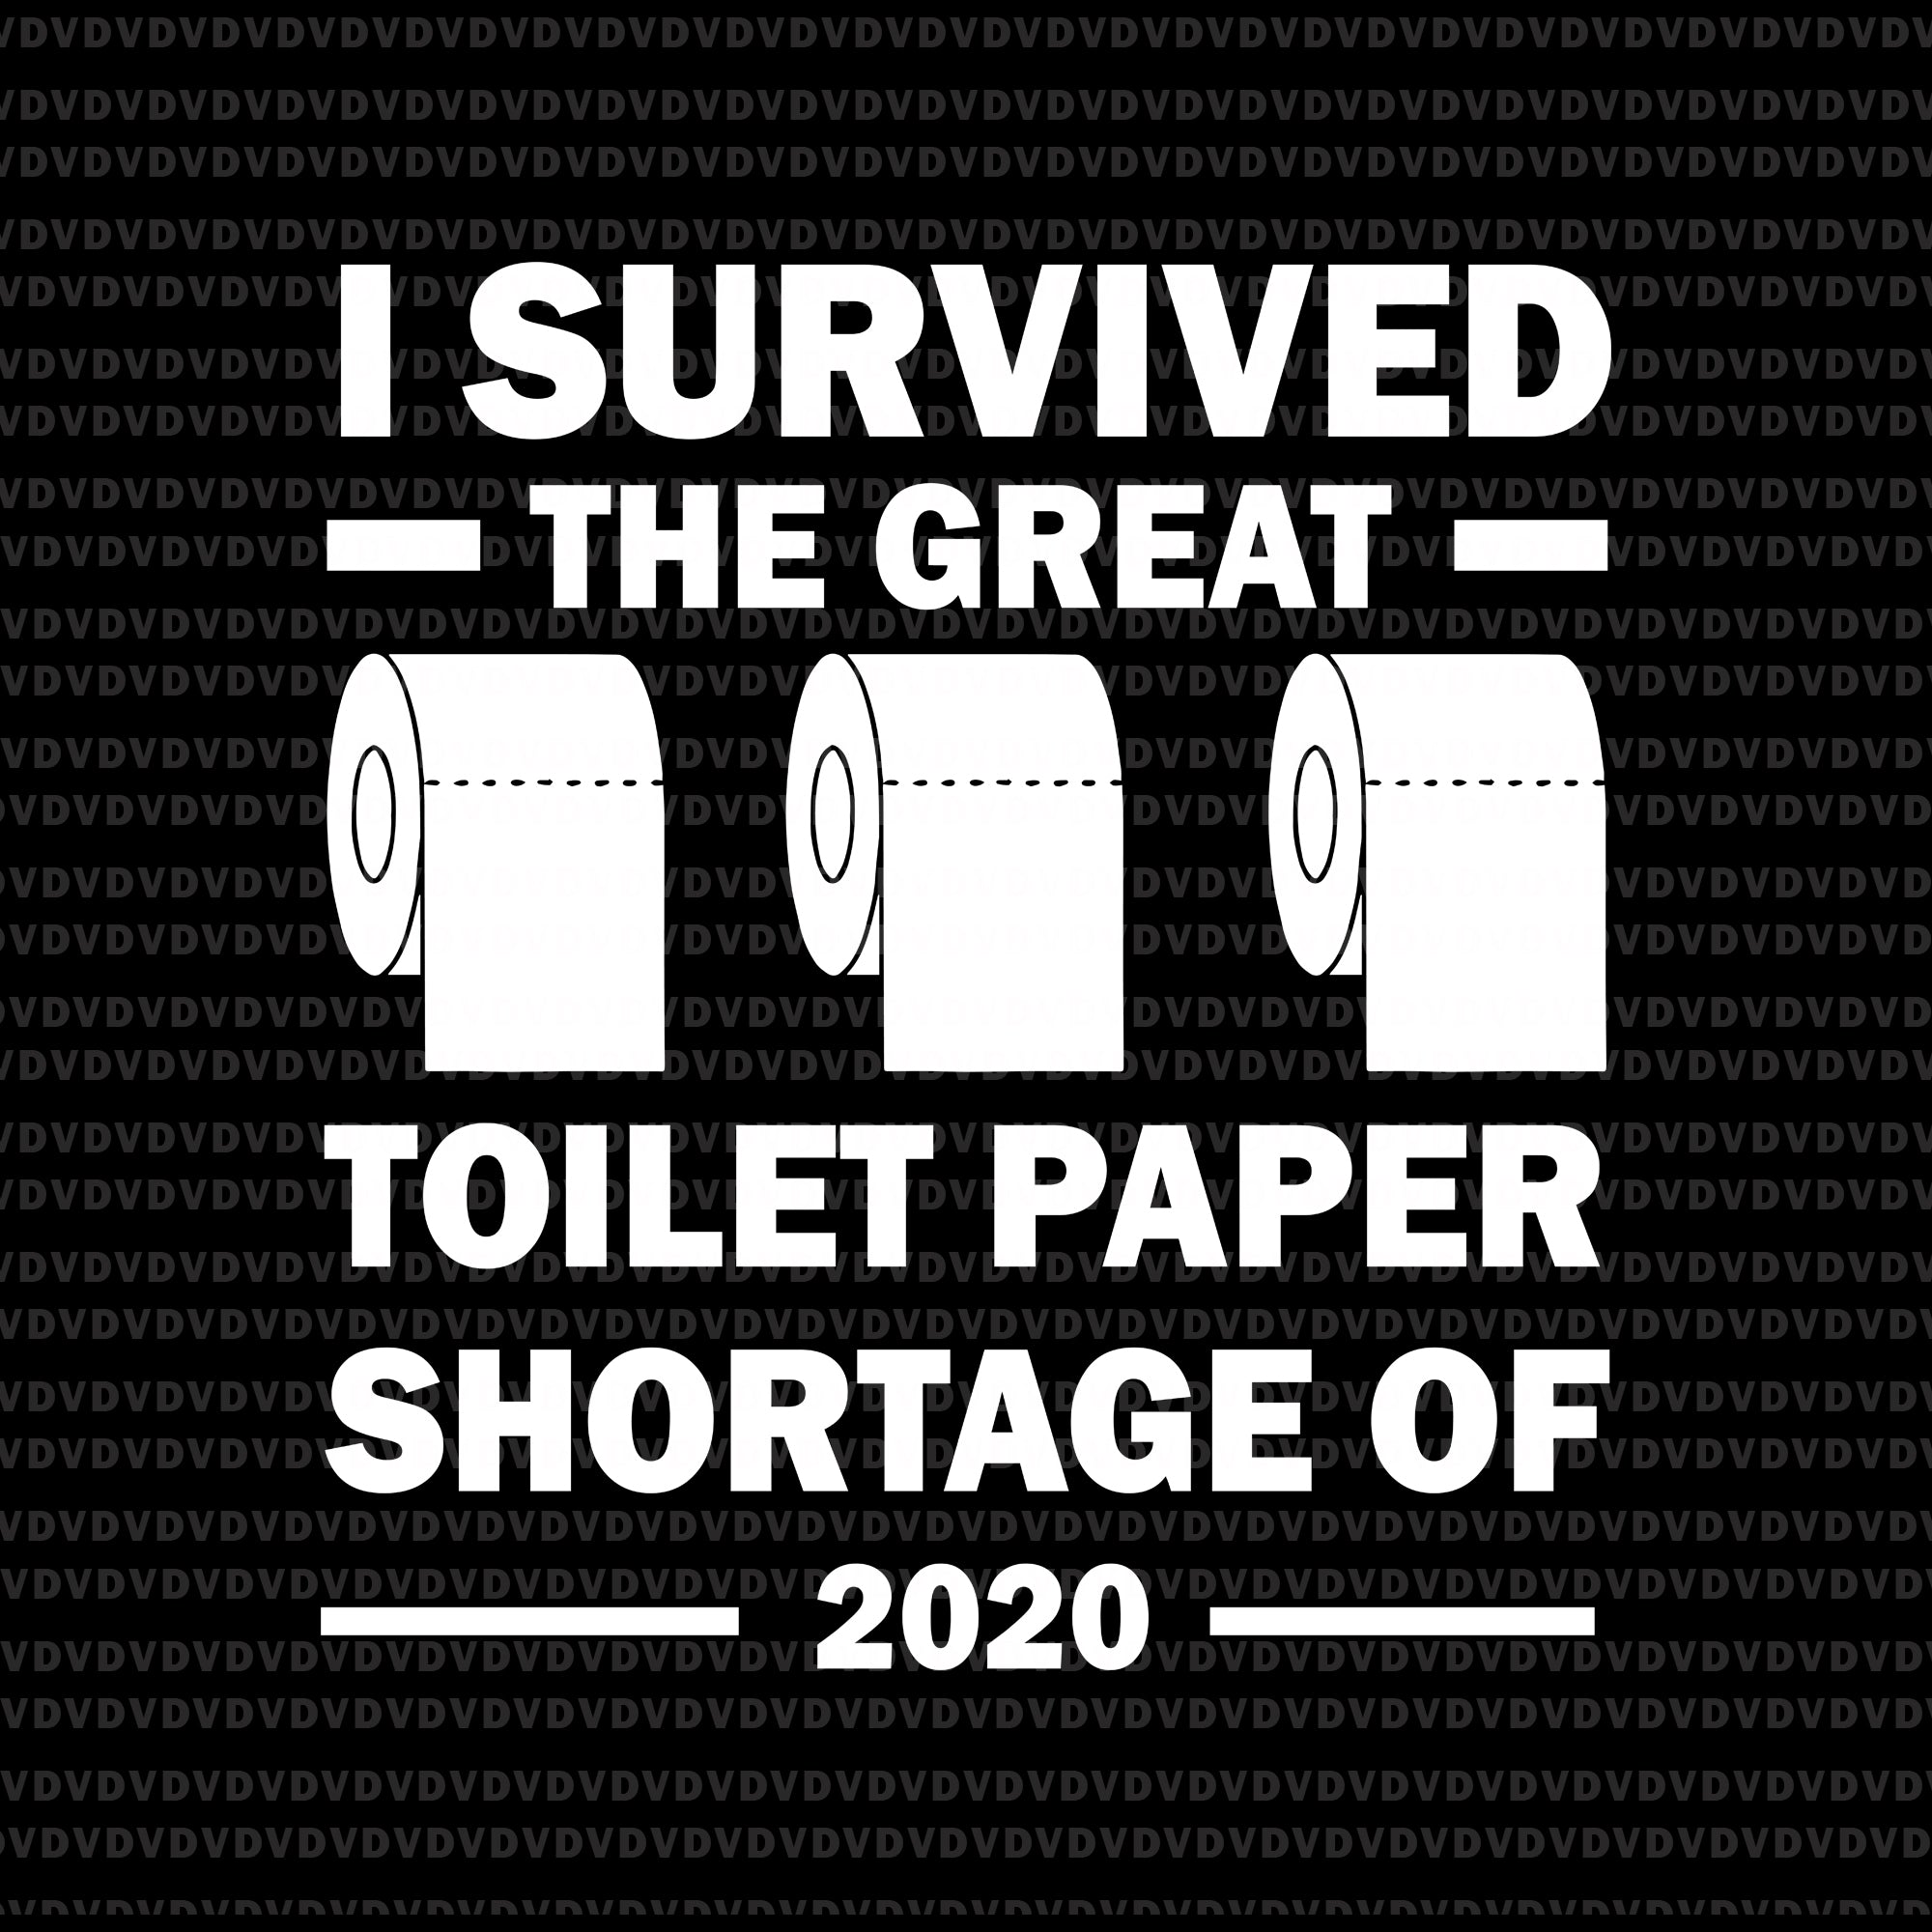 I survived the great toilet paper shortage of 2020 svg, i survived the great toilet paper shortage of 2020 png, i survived the great toilet paper shortage of 2020